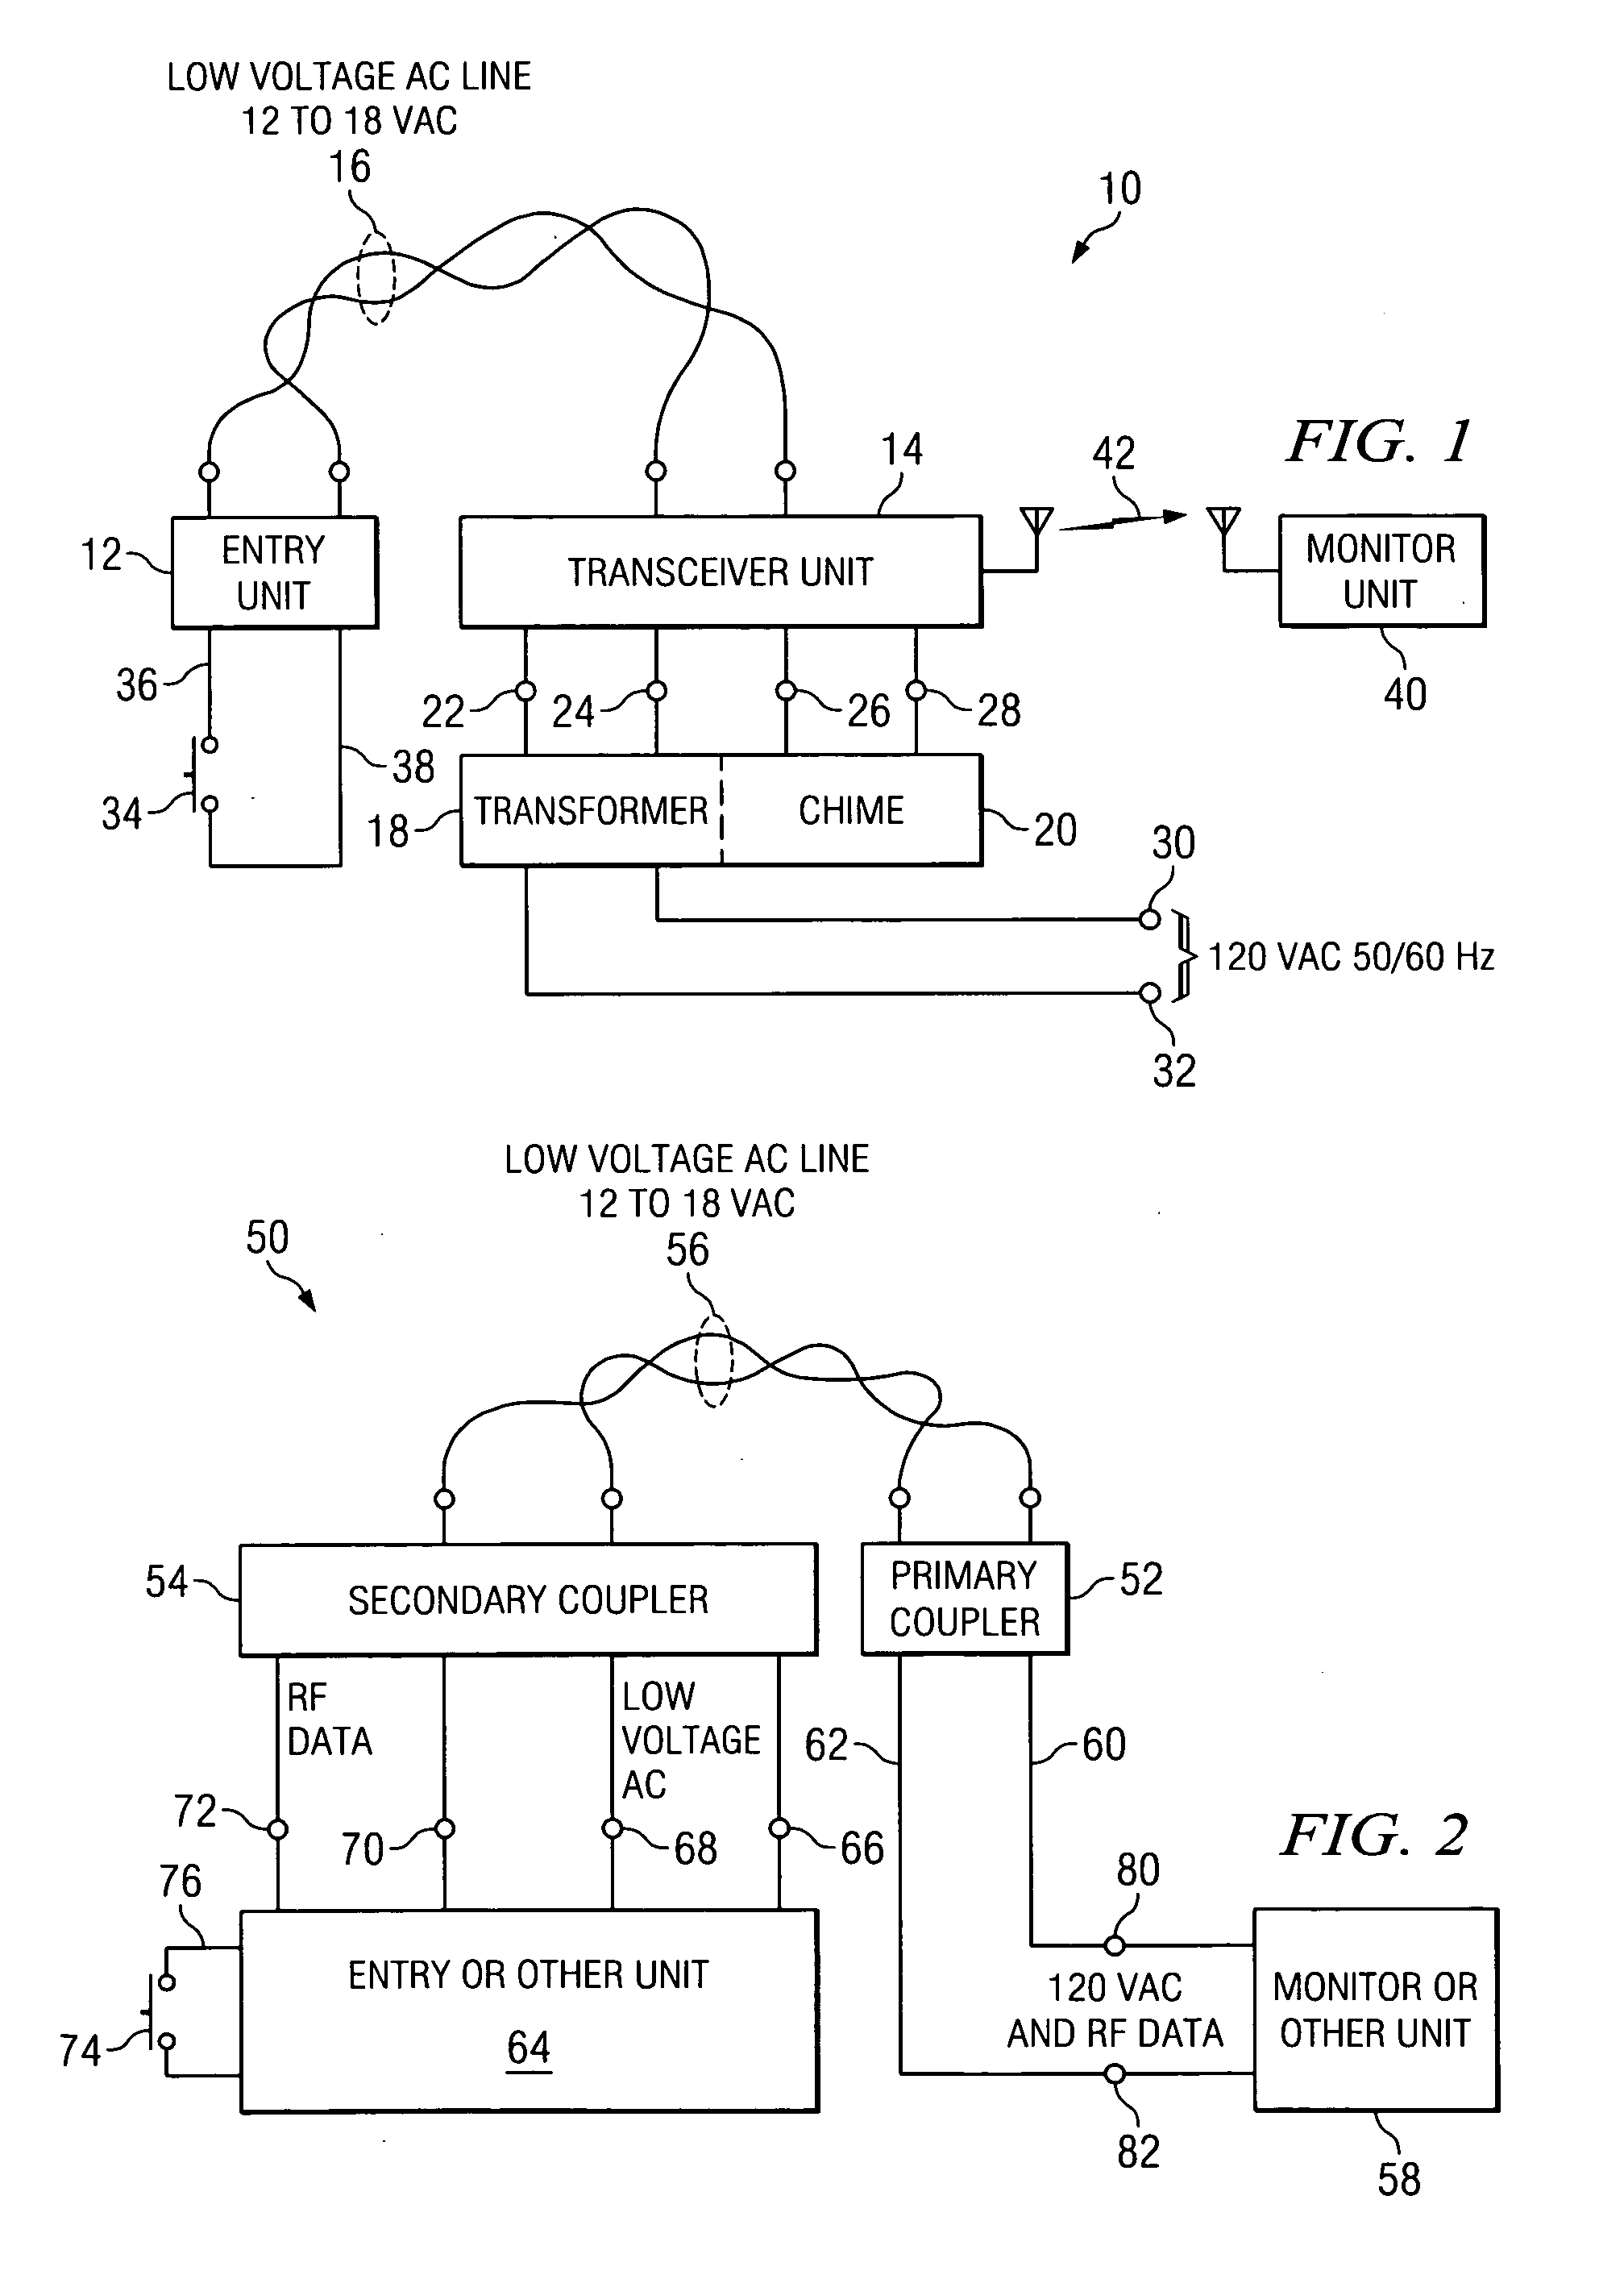 Apparatus and method for converting a low voltage AC wiring circuit to a high speed data communications link